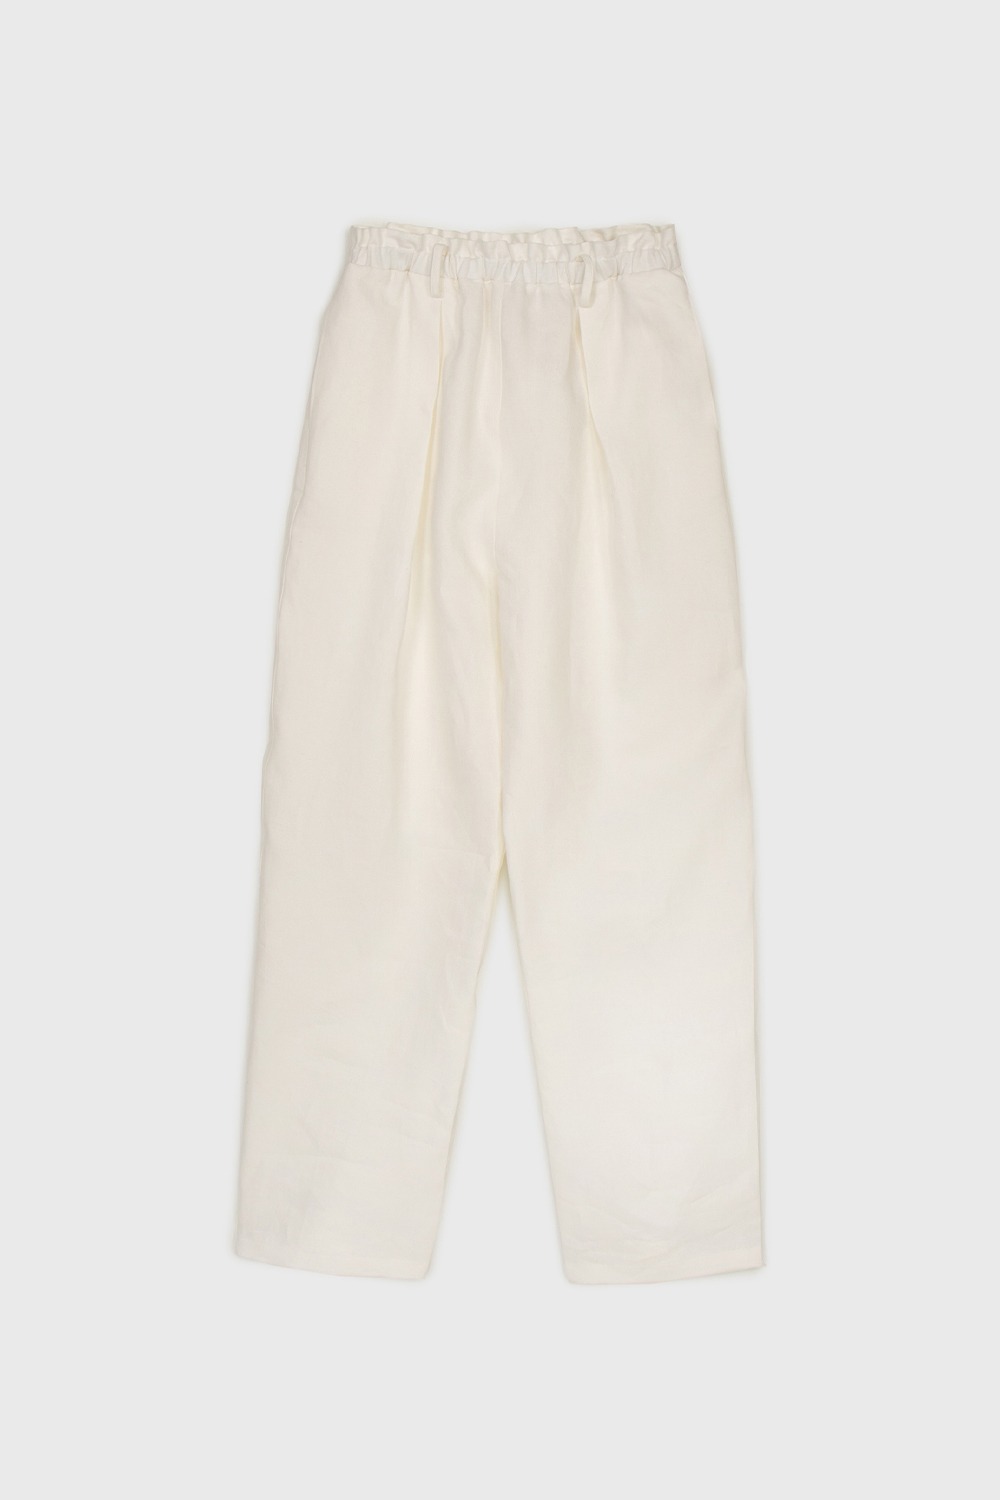 RELAXED WIDE PANTS - WHITE LINEN